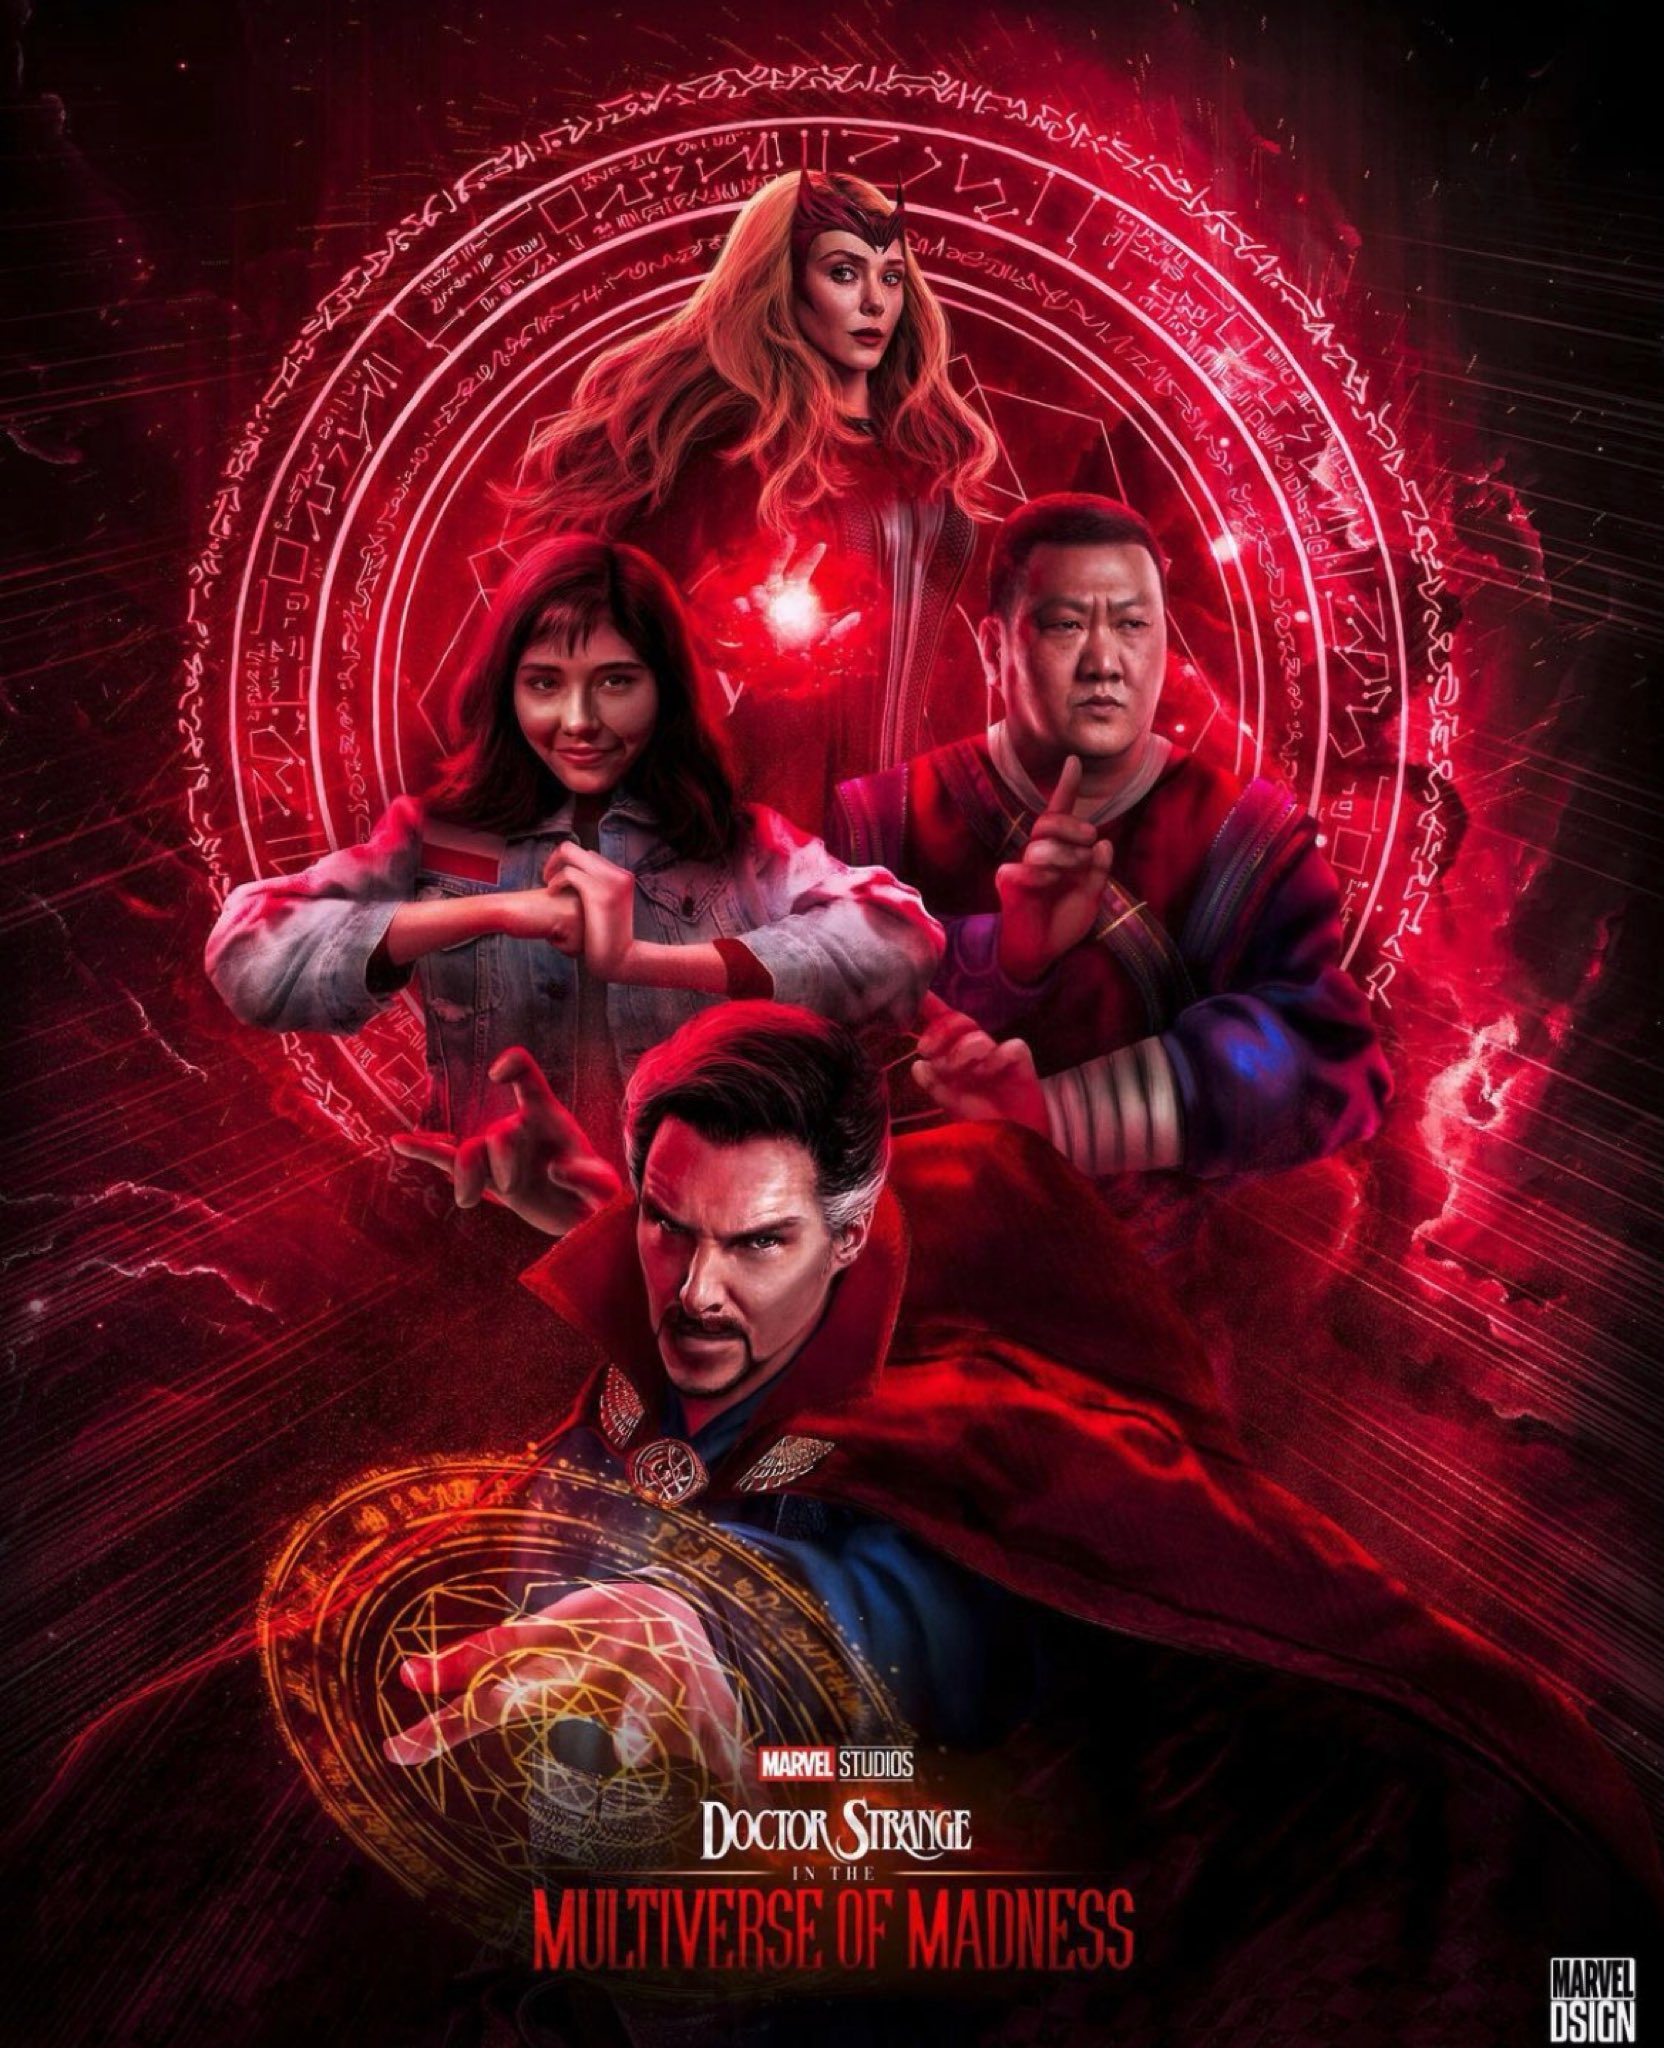 Doctor Strange Updates Out This Amazing Fan Made Poster For DOCTOR STRANGE IN THE MULTIVERSE OF MADNESS On Instagram!